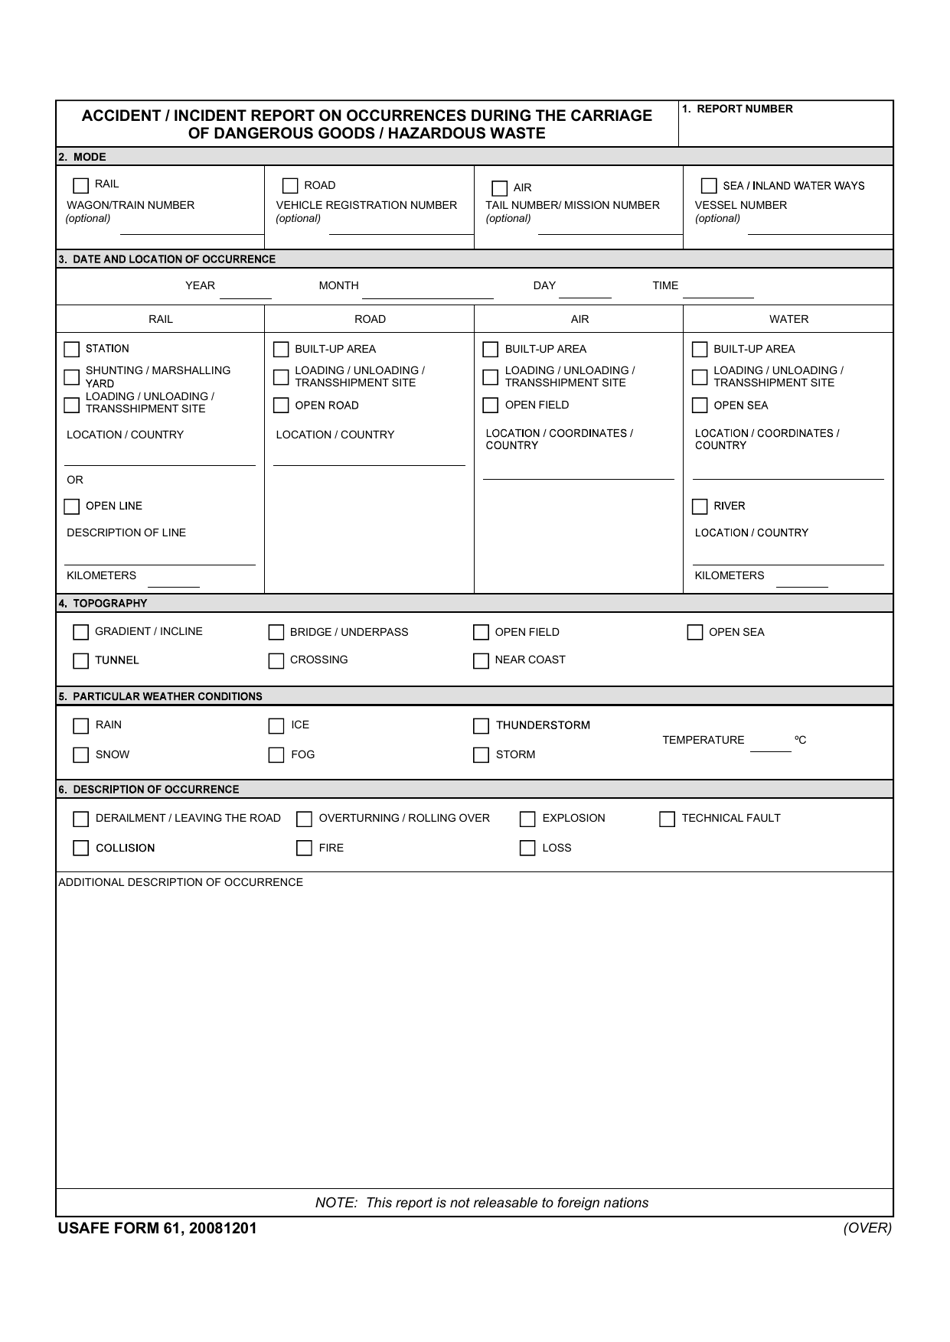 USAFE Form 61 Accident / Incident Report on Occurrences During the Carriage of Dangerous Goods / Hazardous Waste, Page 1